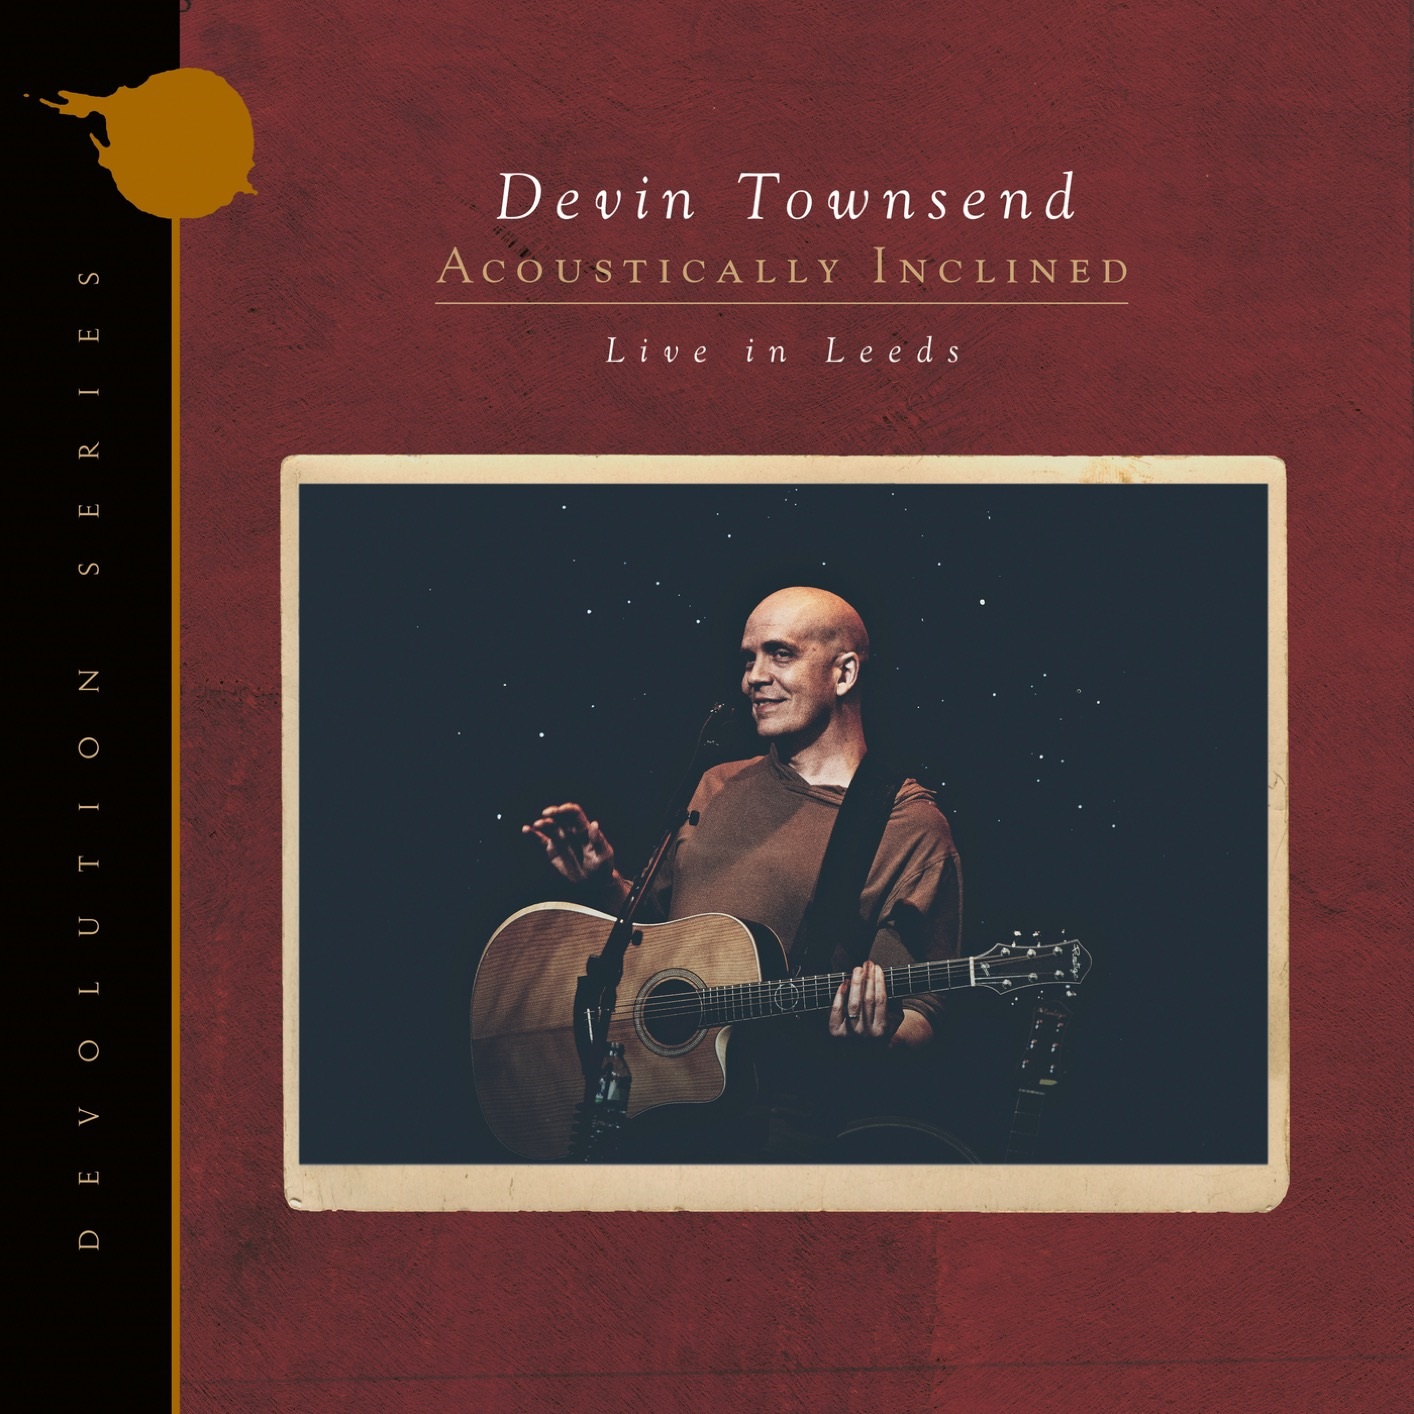 Devin Townsend – Devolution Series #1 – Acoustically Inclined, Live in Leeds (2021) [FLAC 24bit/48kHz]